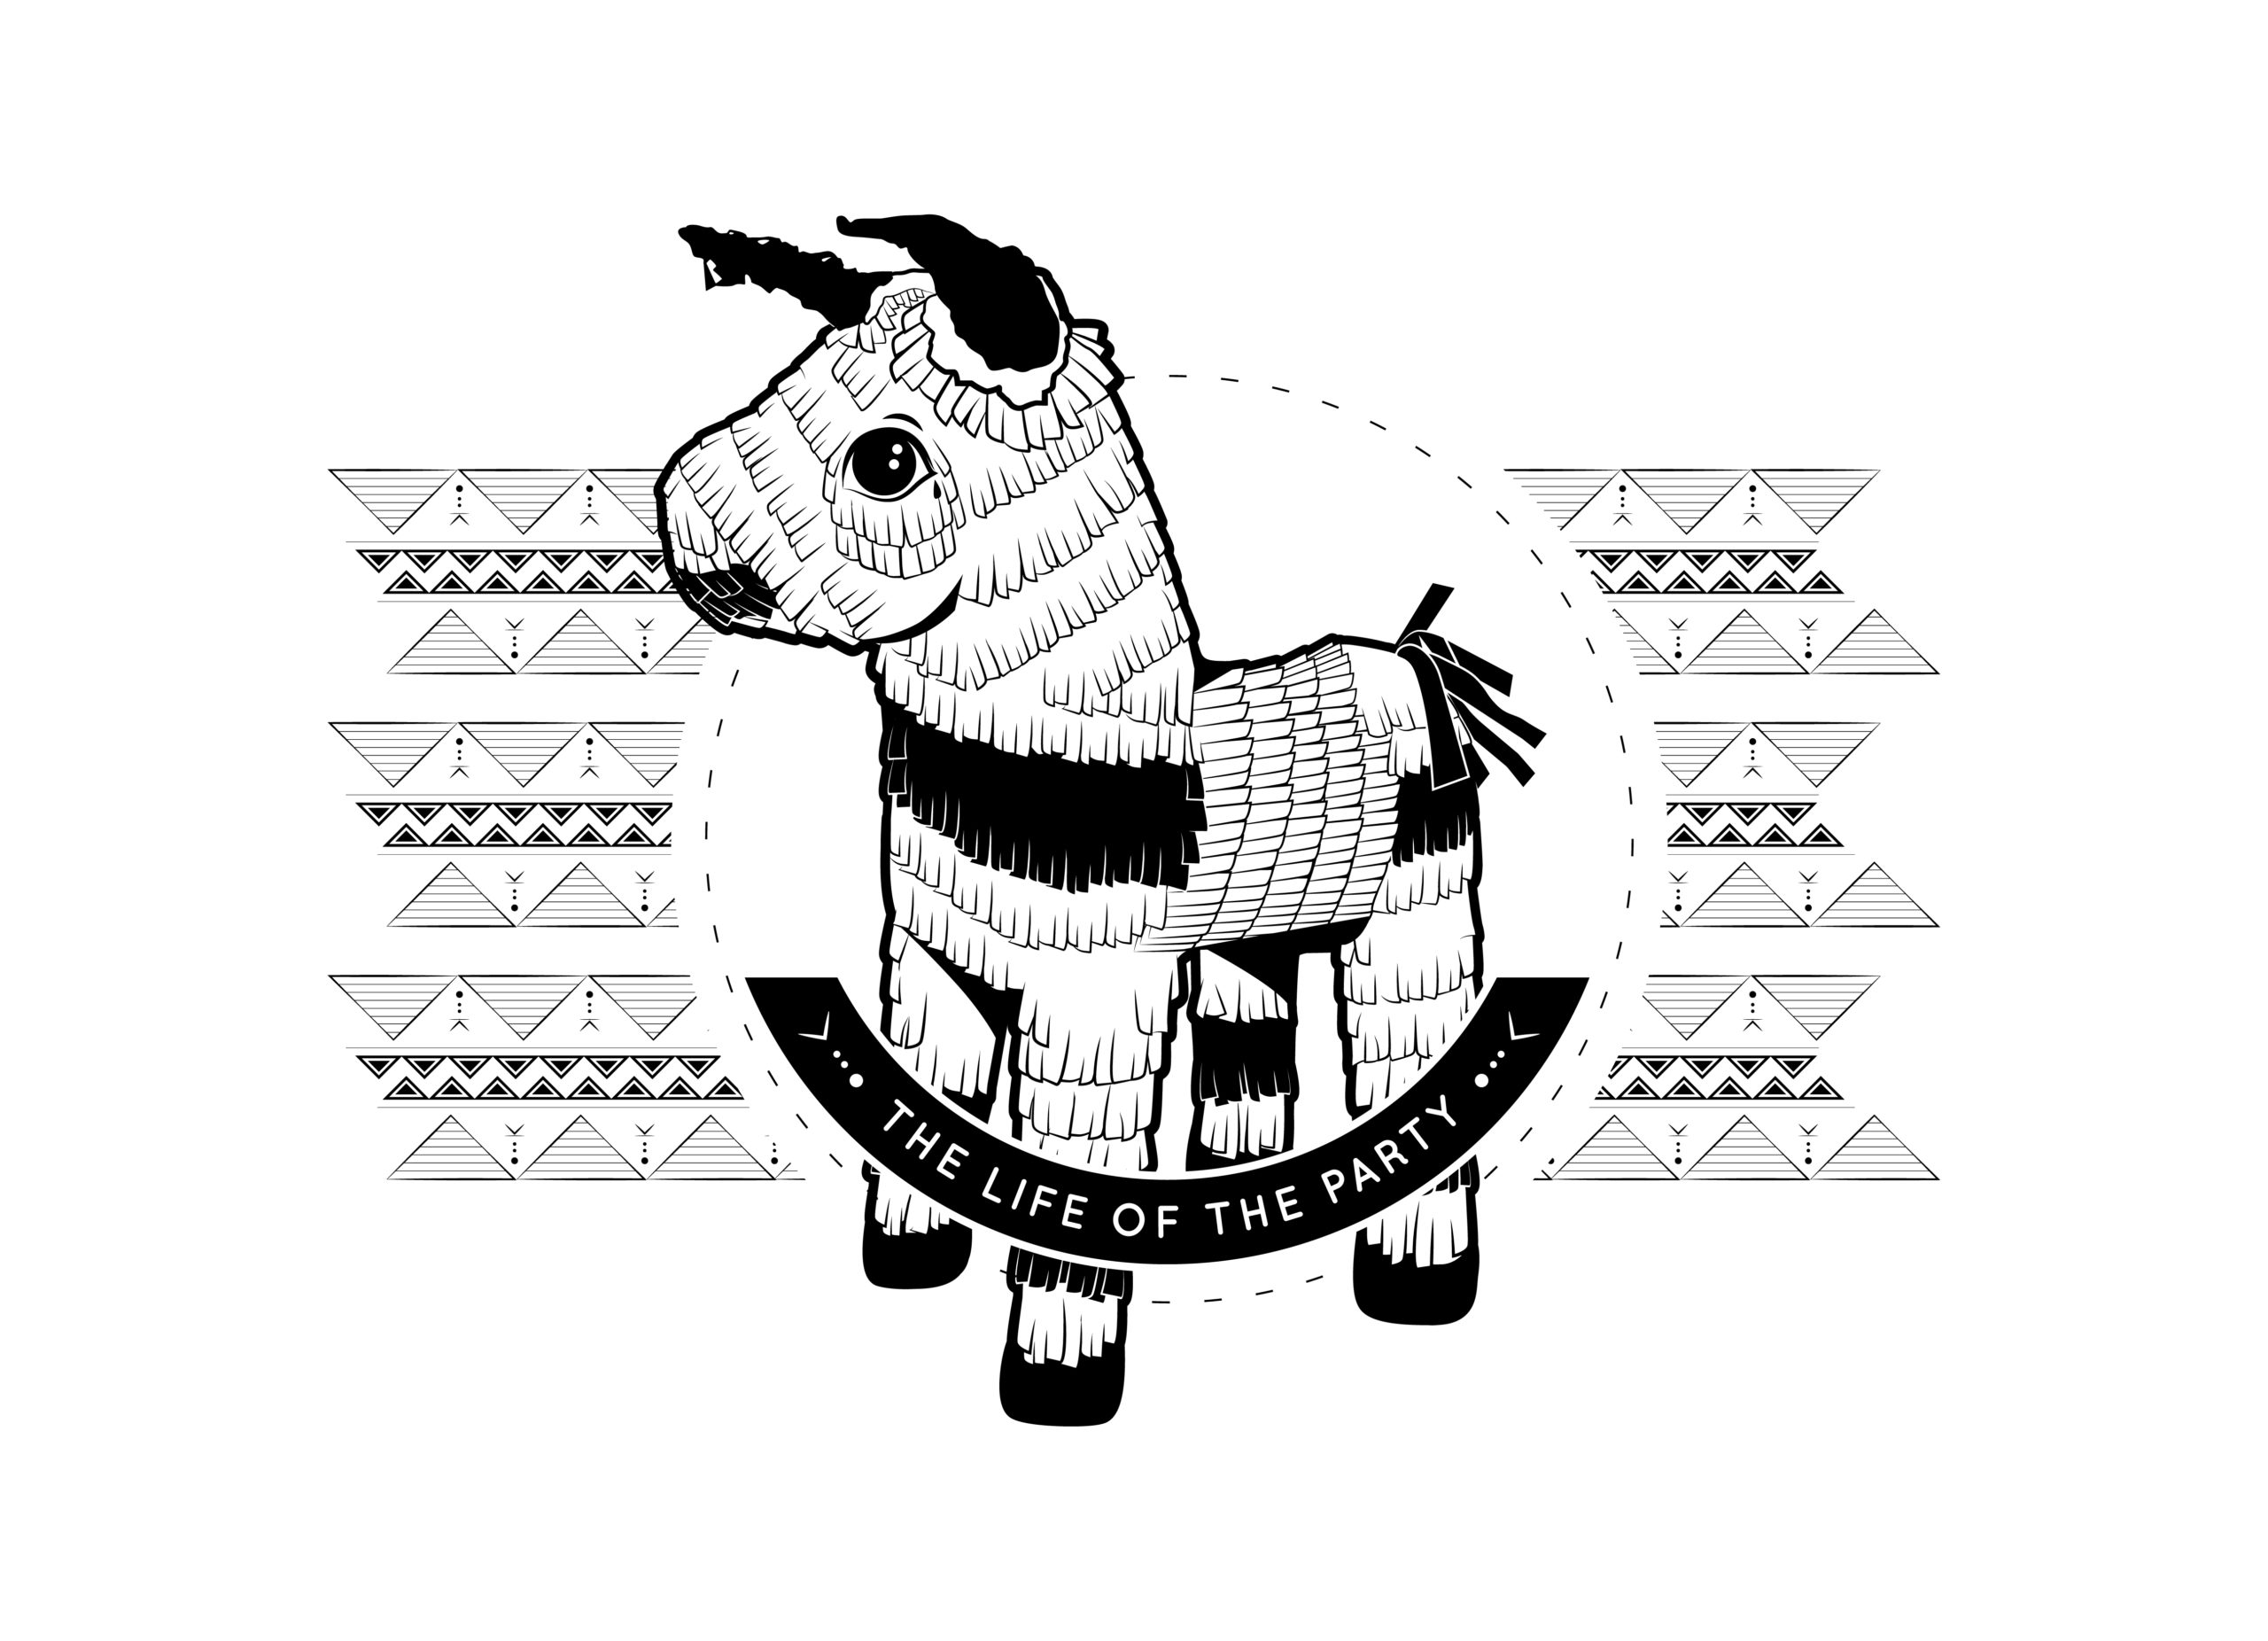 Piñata digital illustration with patterned background. Displayed in black and white.